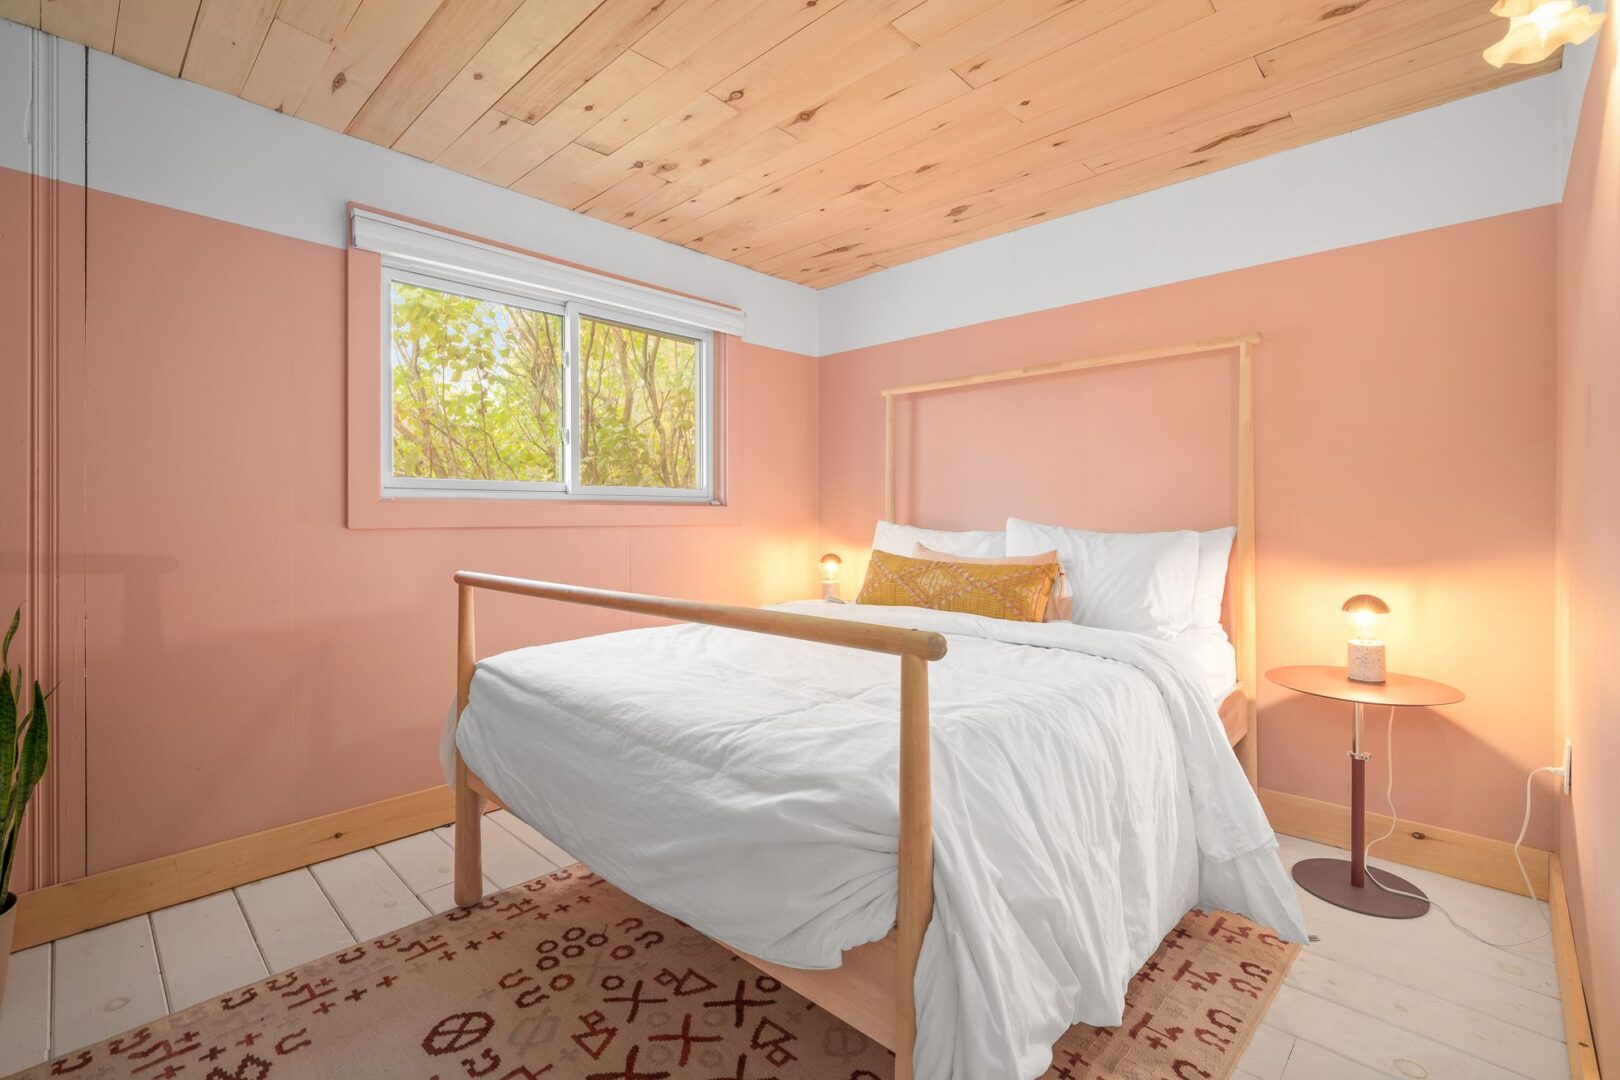 A big, bright bedroom with a large bed, a wood-panelled ceiling, and pink walls.